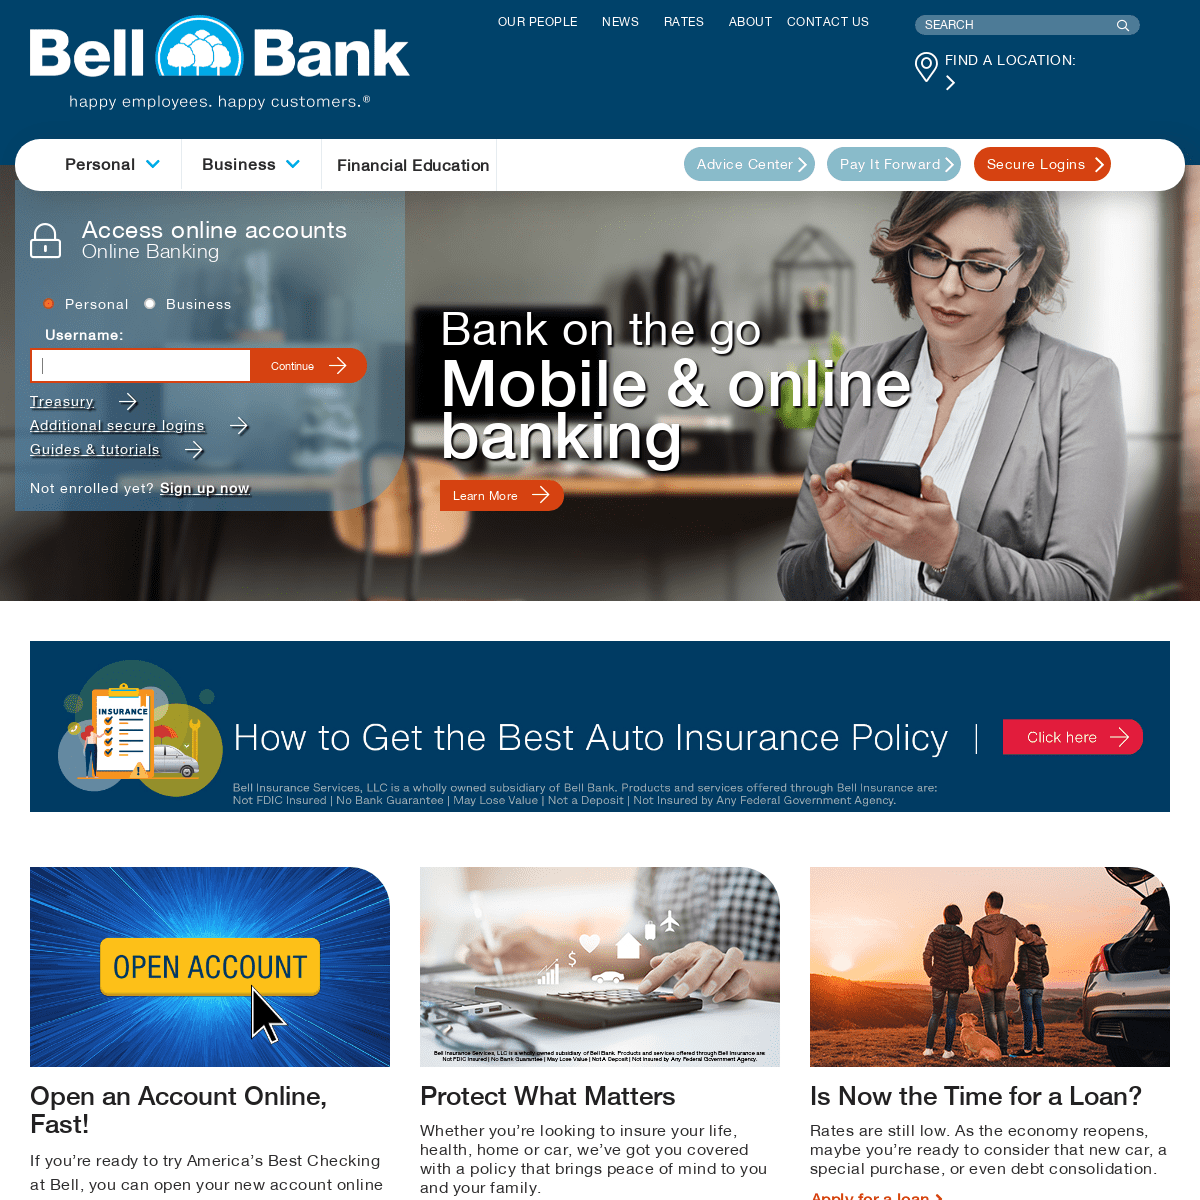 A complete backup of https://bell.bank